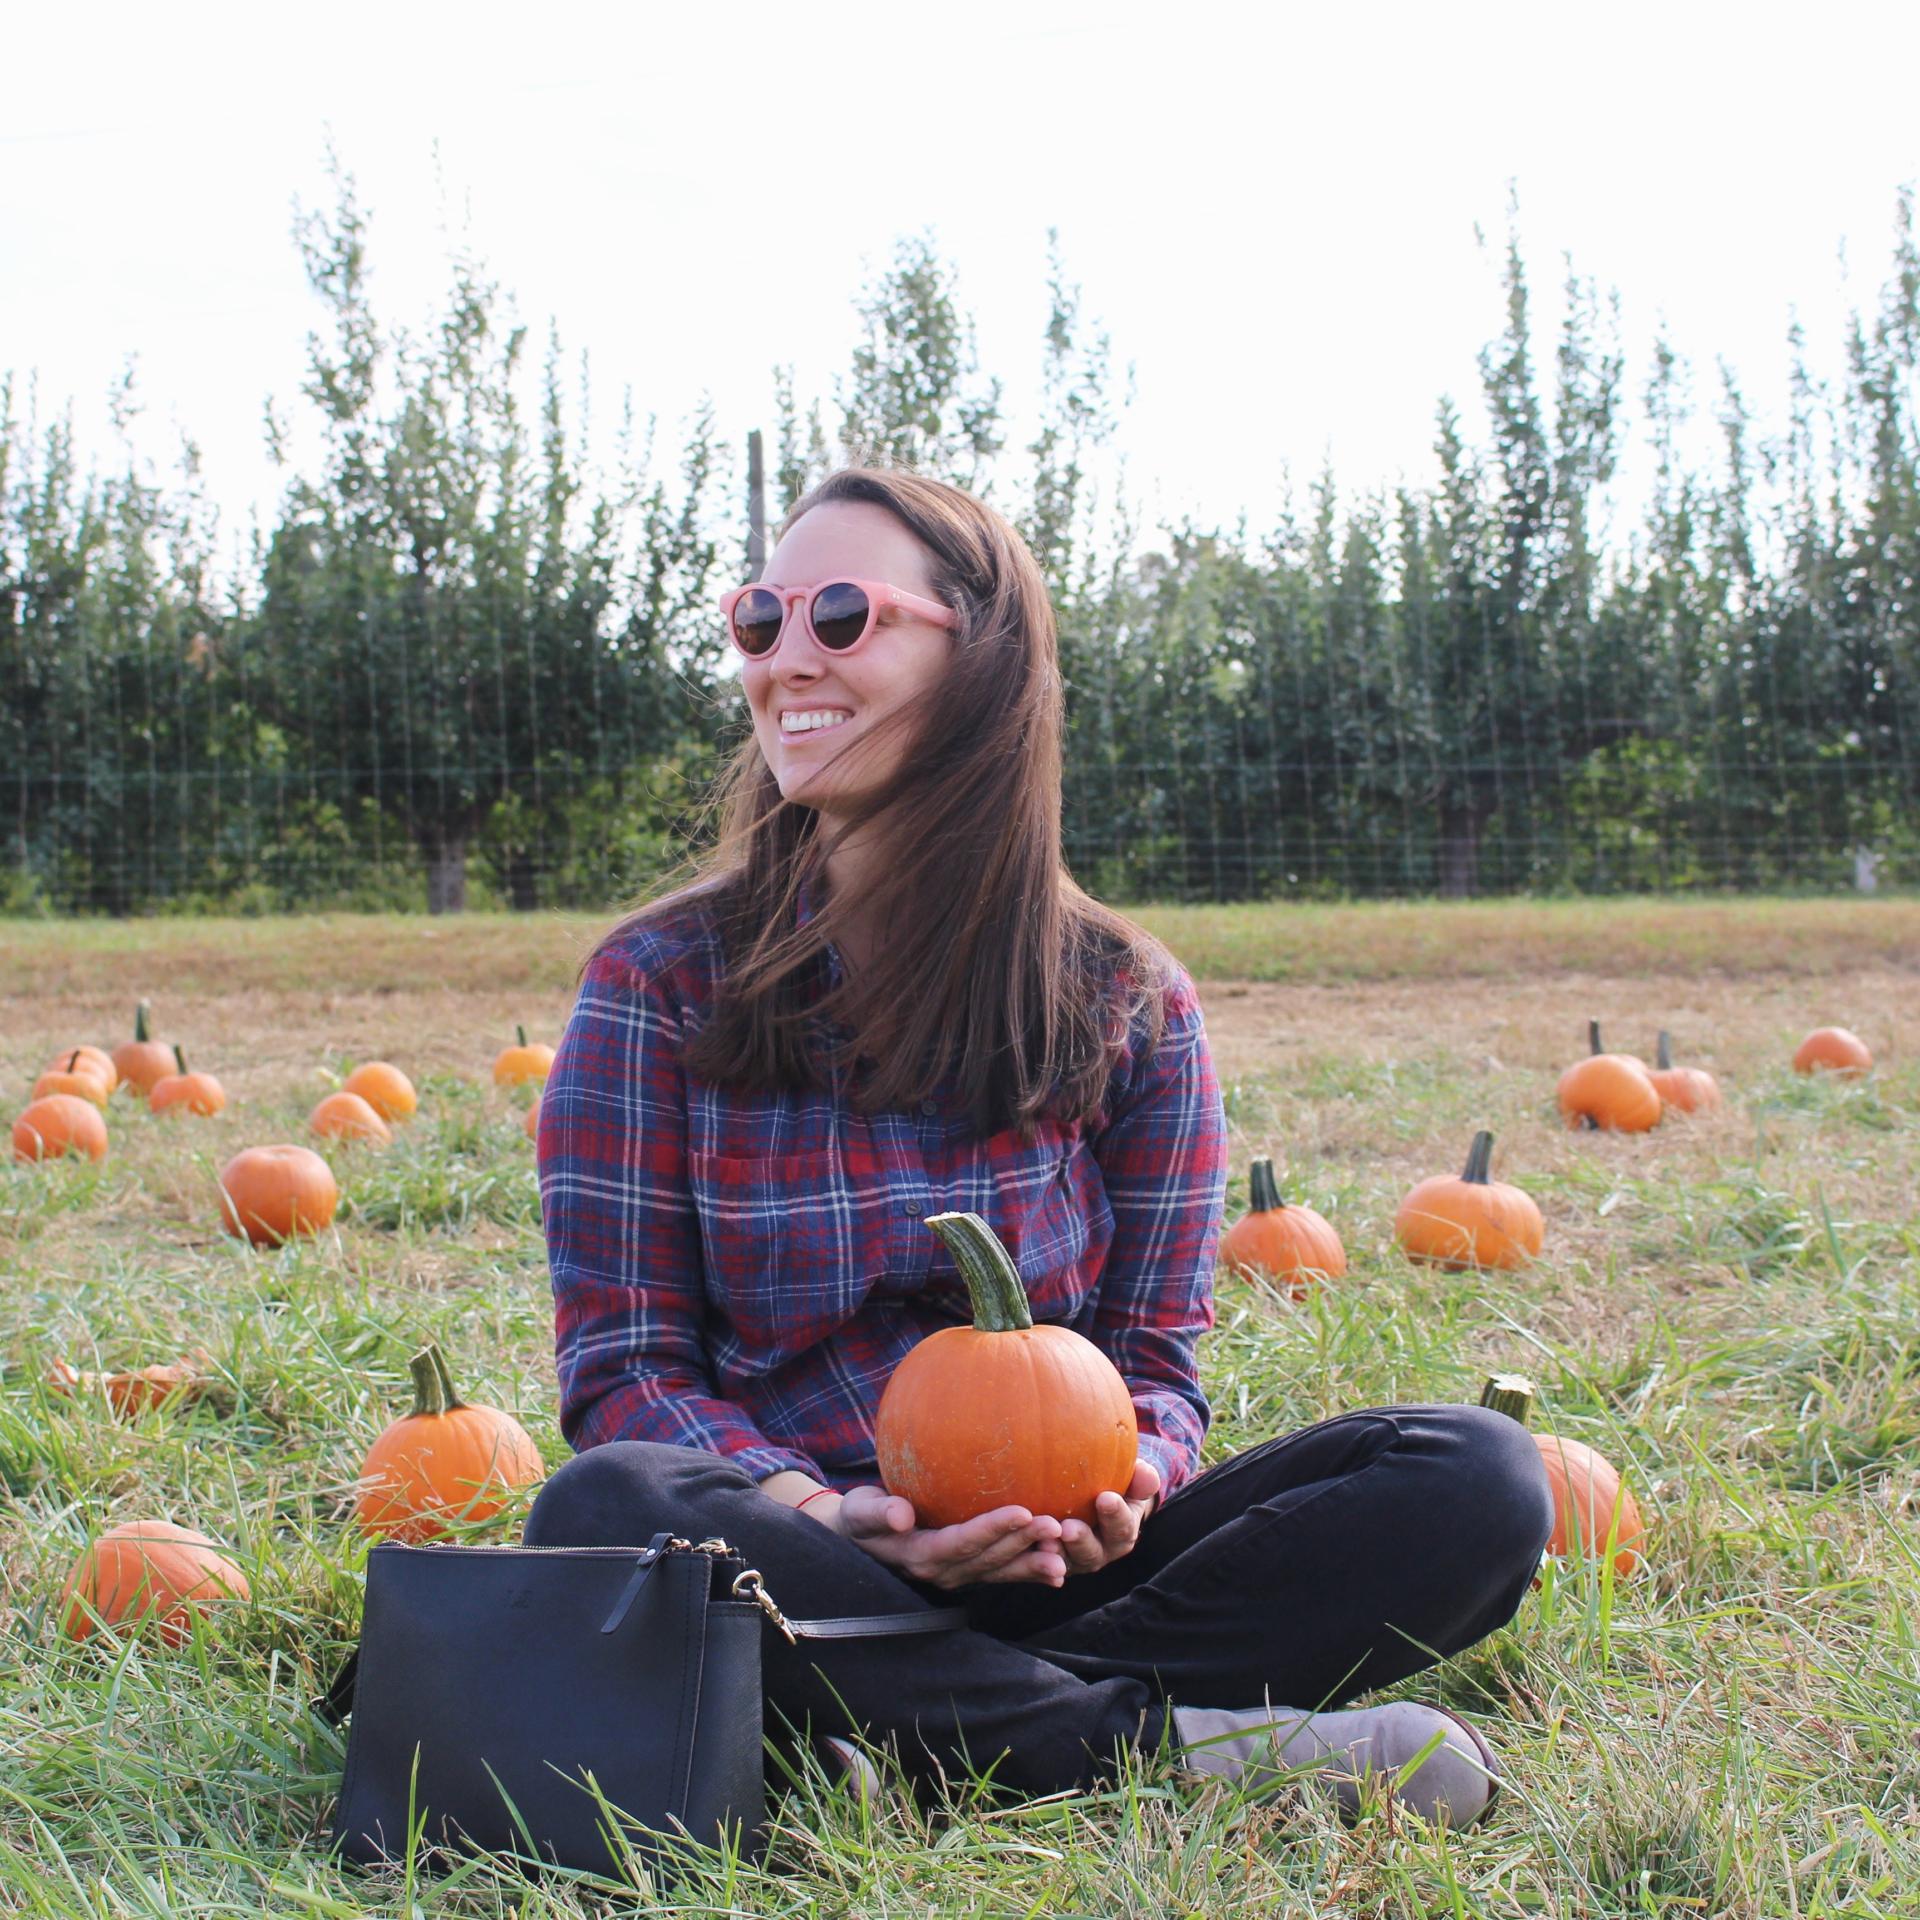 LOCAL: Apple Picking and Pumpkin Patching at Riamede Farm by popular New Jersey blogger What's For Dinner Esq.